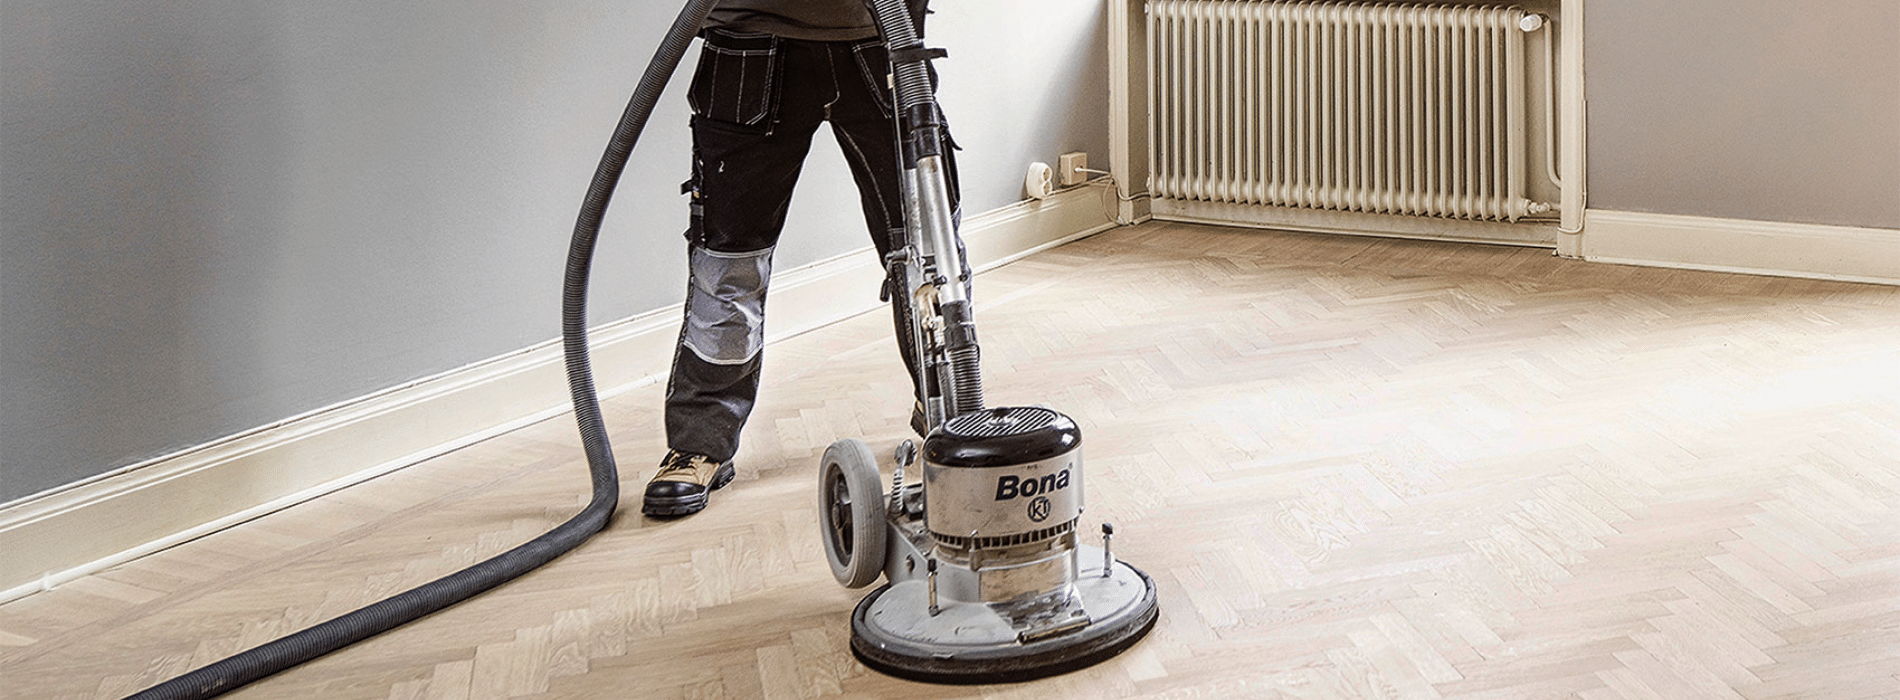 Mr Sander® skillfully sanding a herringbone floor with the powerful Effect 2200 Bona belt sander (250x650 mm). Our dust extraction system with HEPA filter ensures a clean and efficient outcome. Experience top-quality floor sanding services.